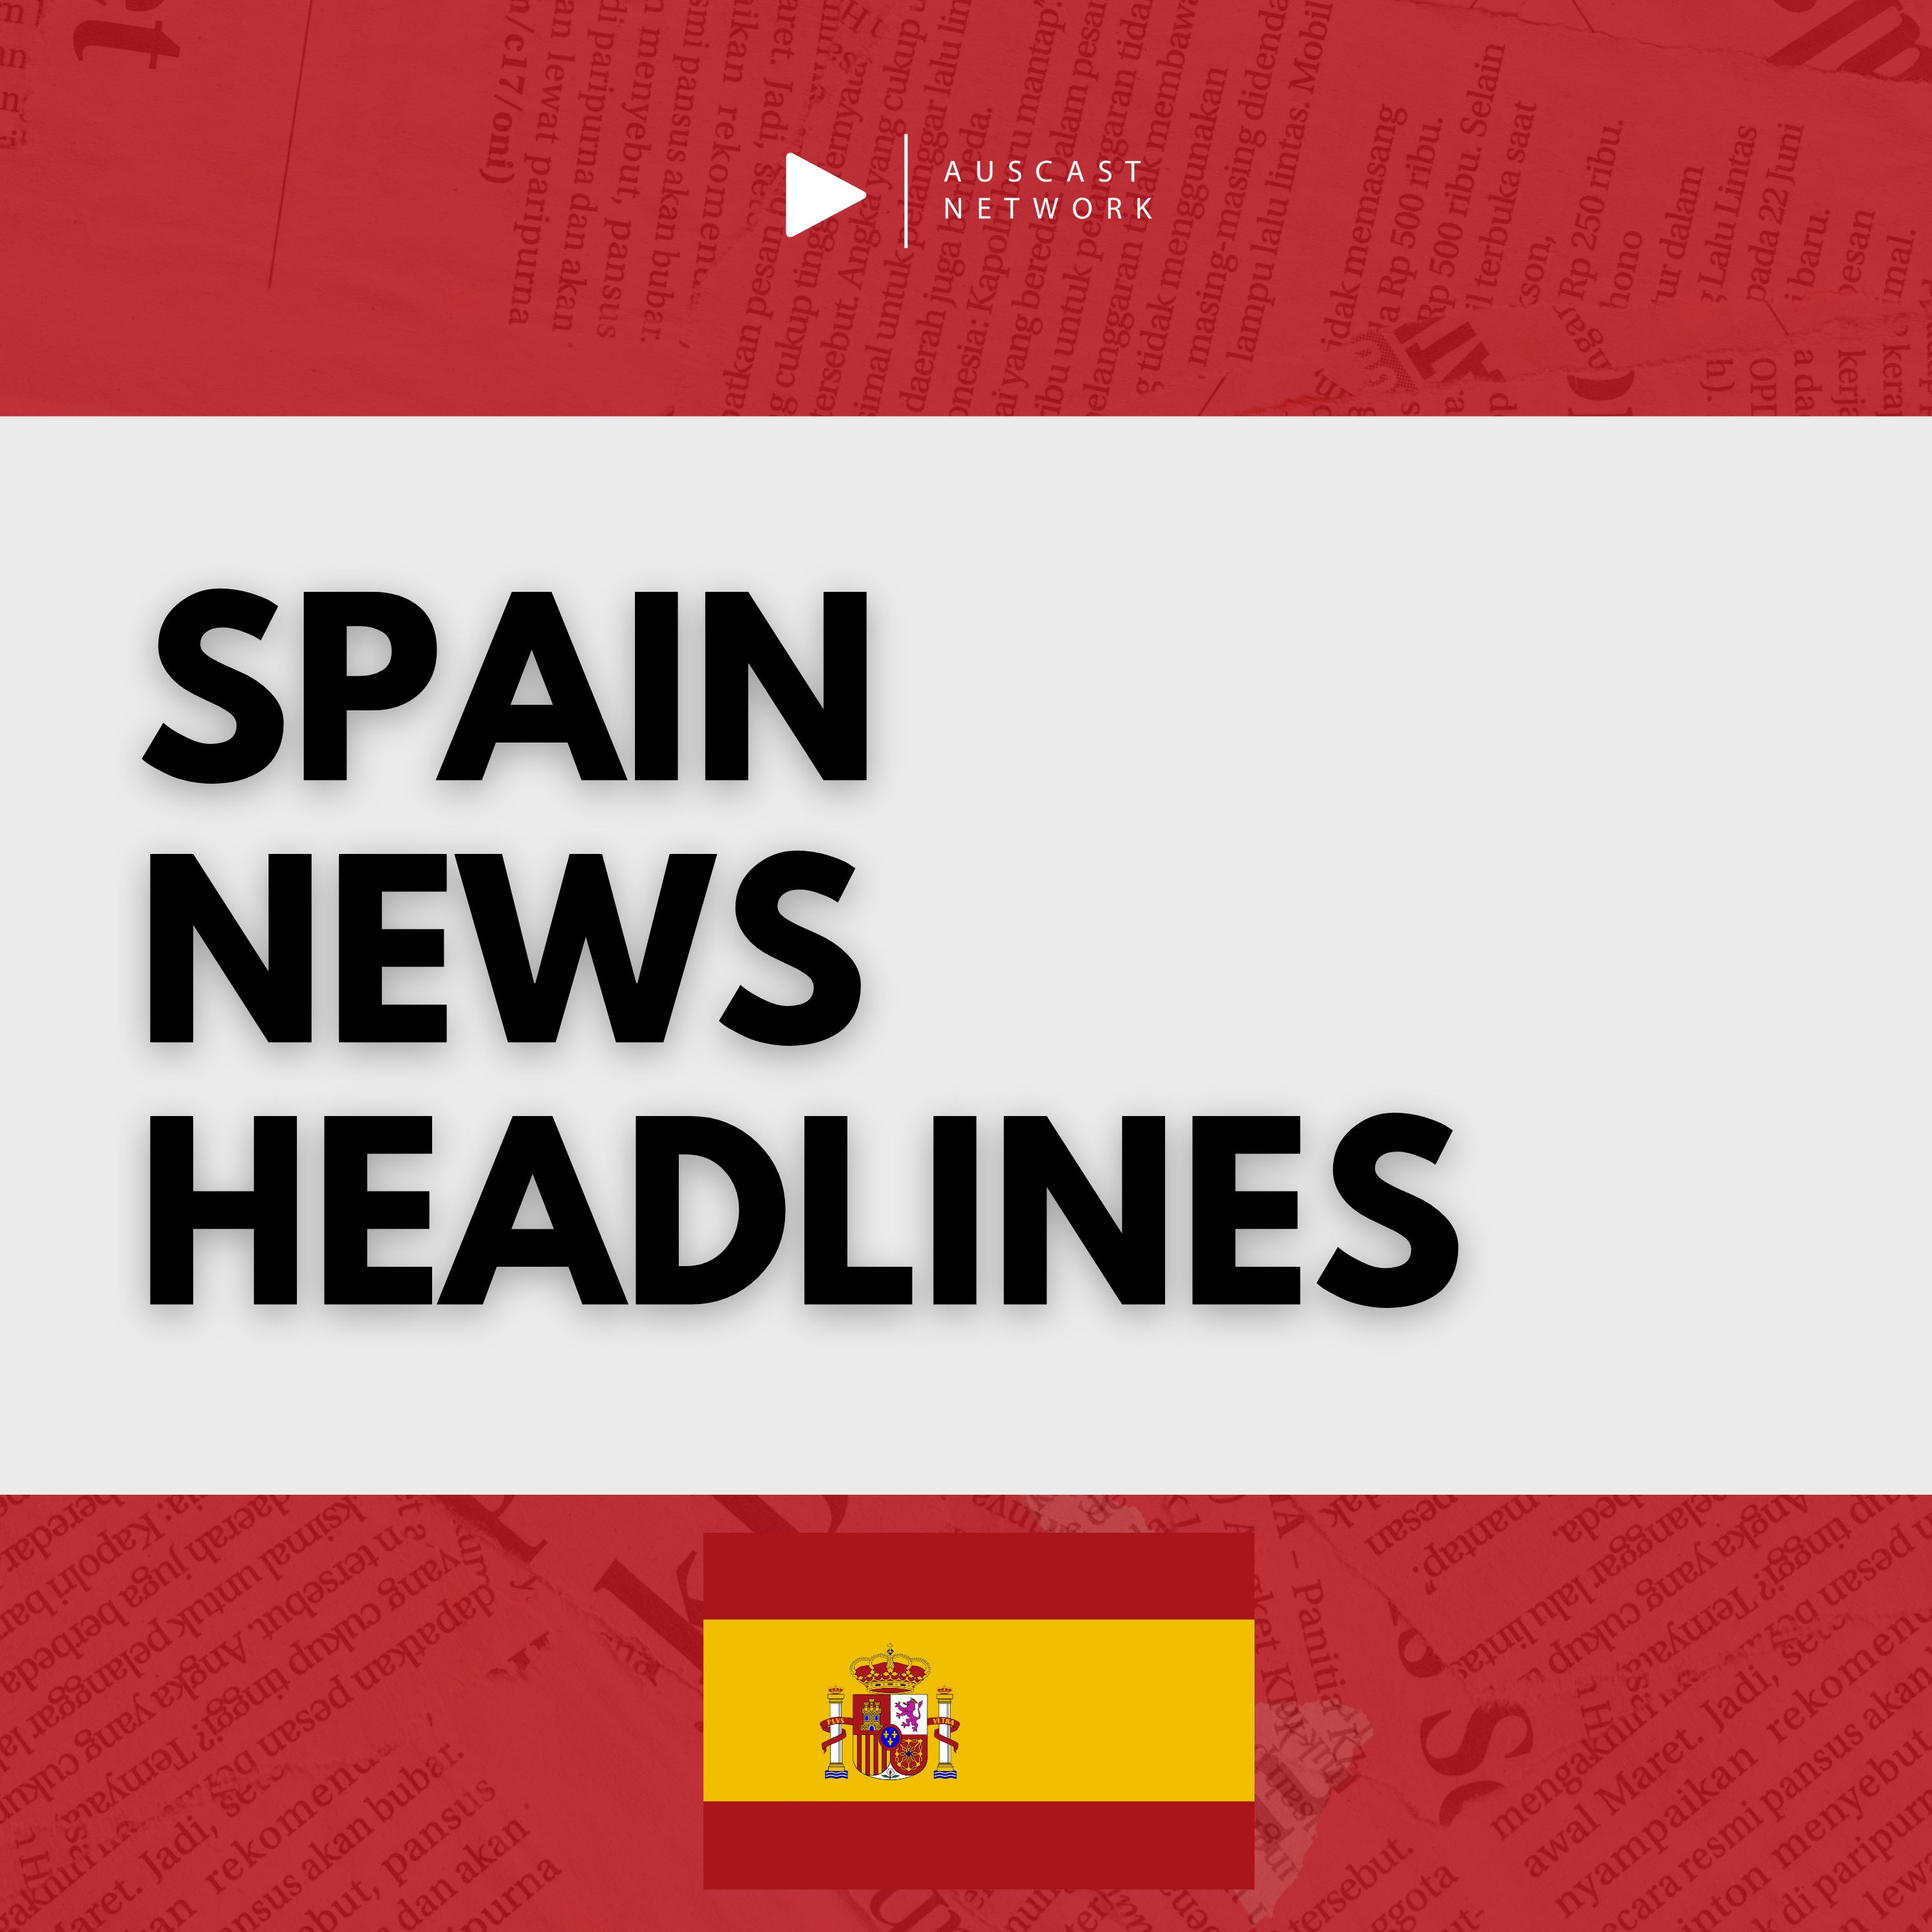 Tuesday Mar 28, 2023 - Spain - Firefighters progress, Leader in foodtech innovation, Stricter Ship to Ship oil transfer regulations